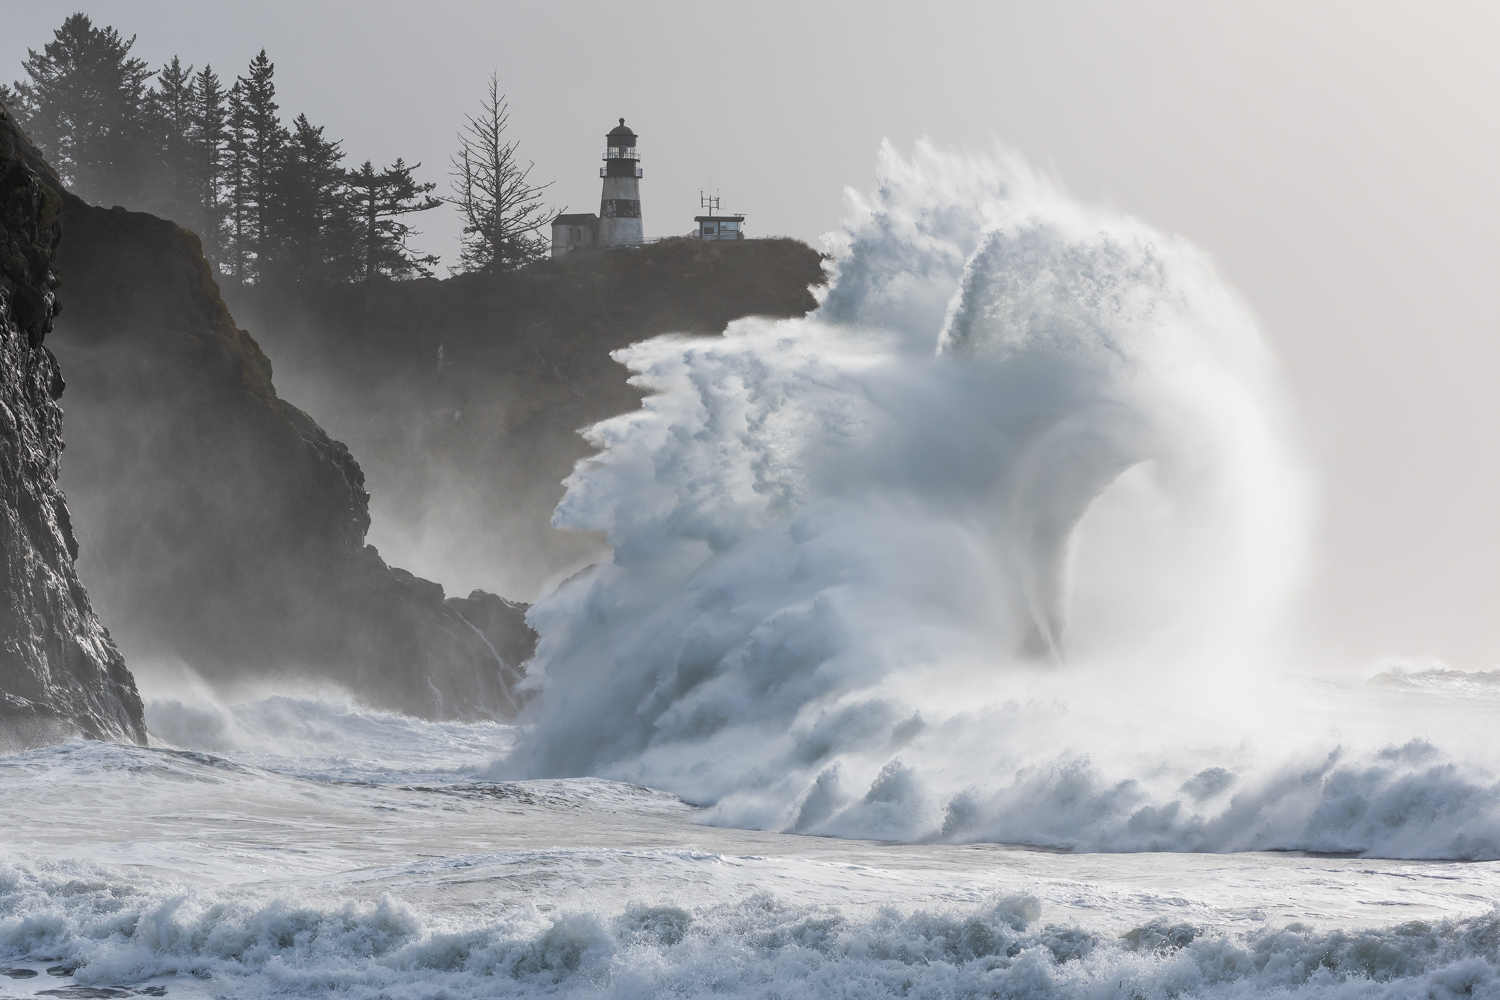 Large wave at Cape Disappointment State Park in Ilwaco, Washington.